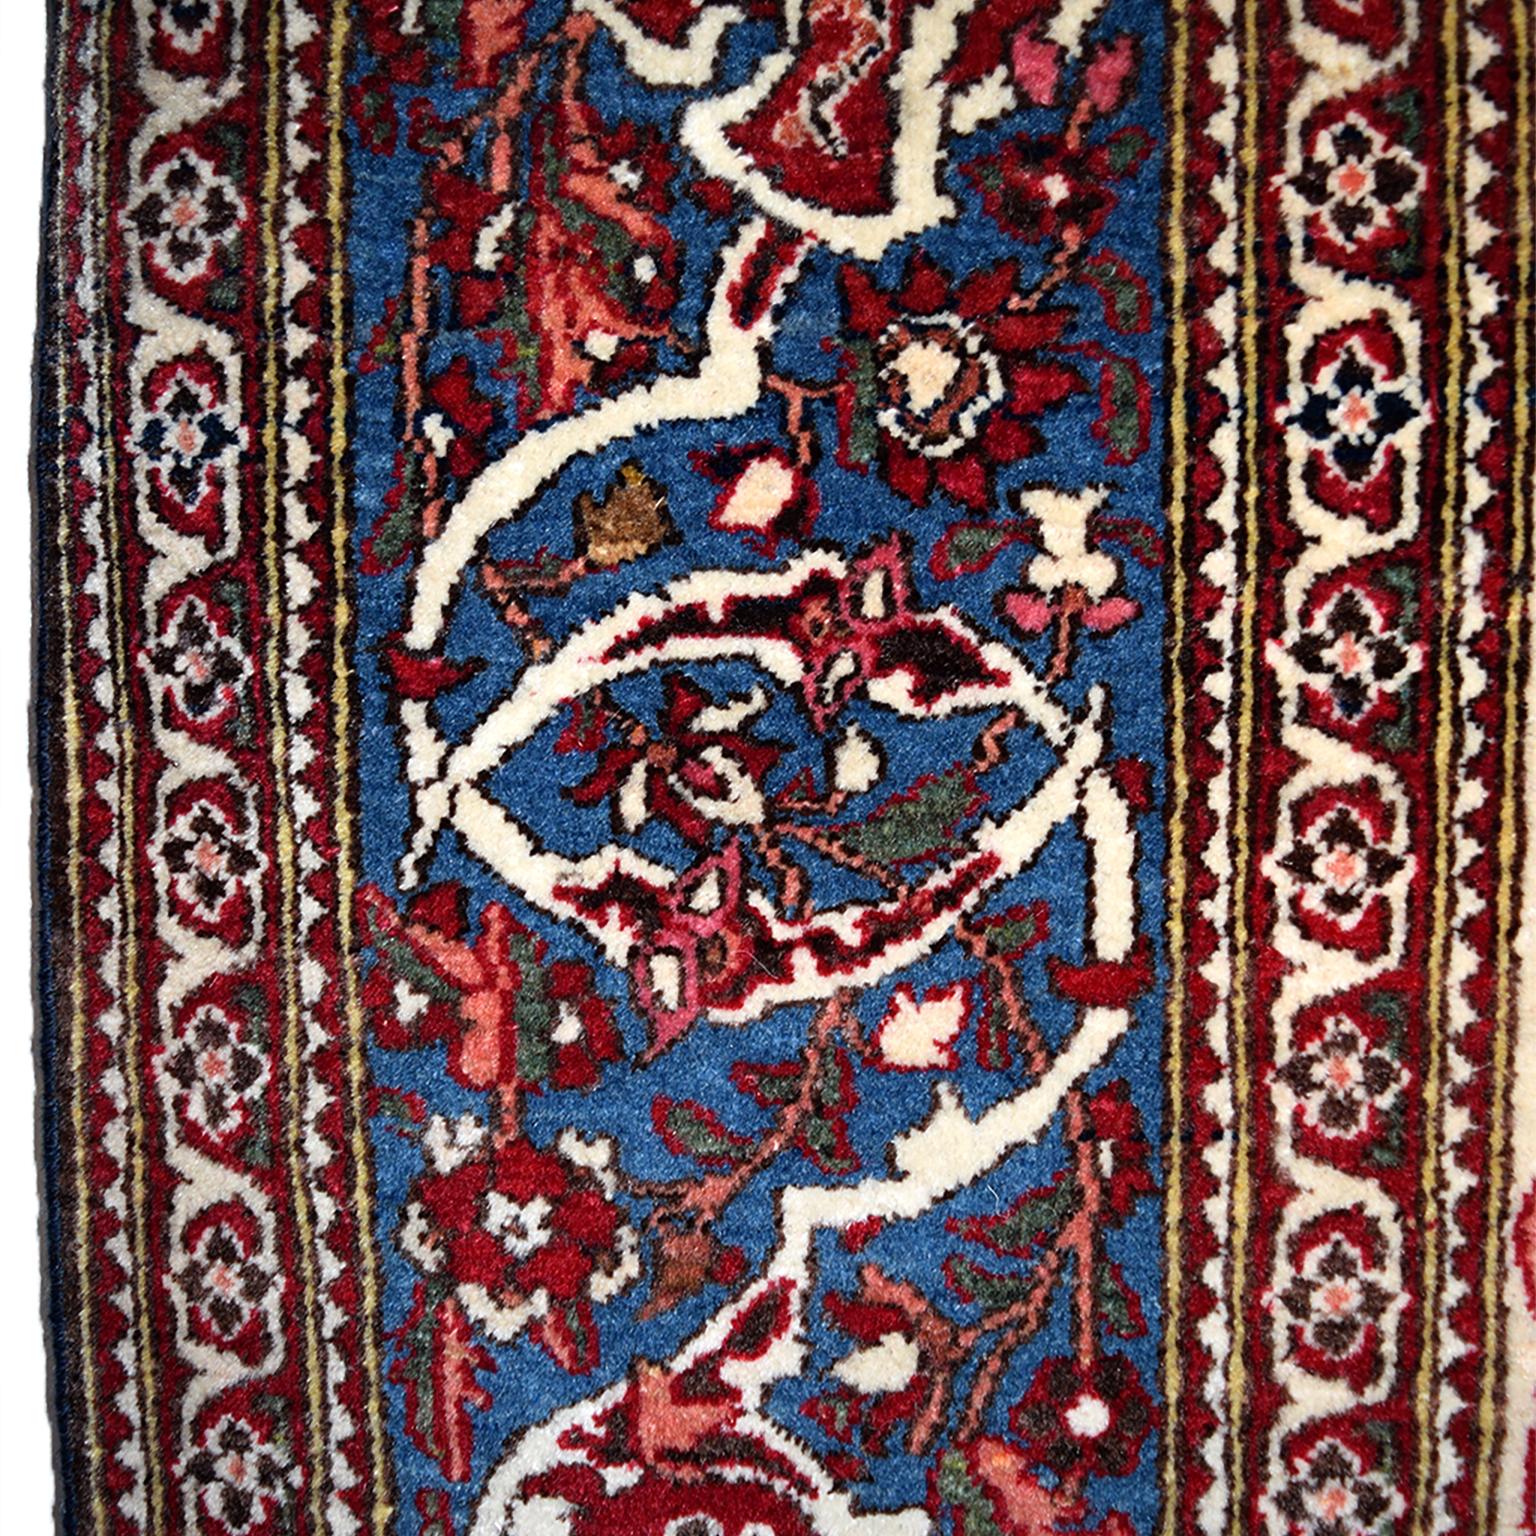 This Persian Isfahan Tree of Life carpet, circa 1890-1900, features a gateway to paradise design anchored by four phoenixes. The phoenix of Persian myth and folklore represents a spiritual guide, a bird of light and enlightenment and spiritual